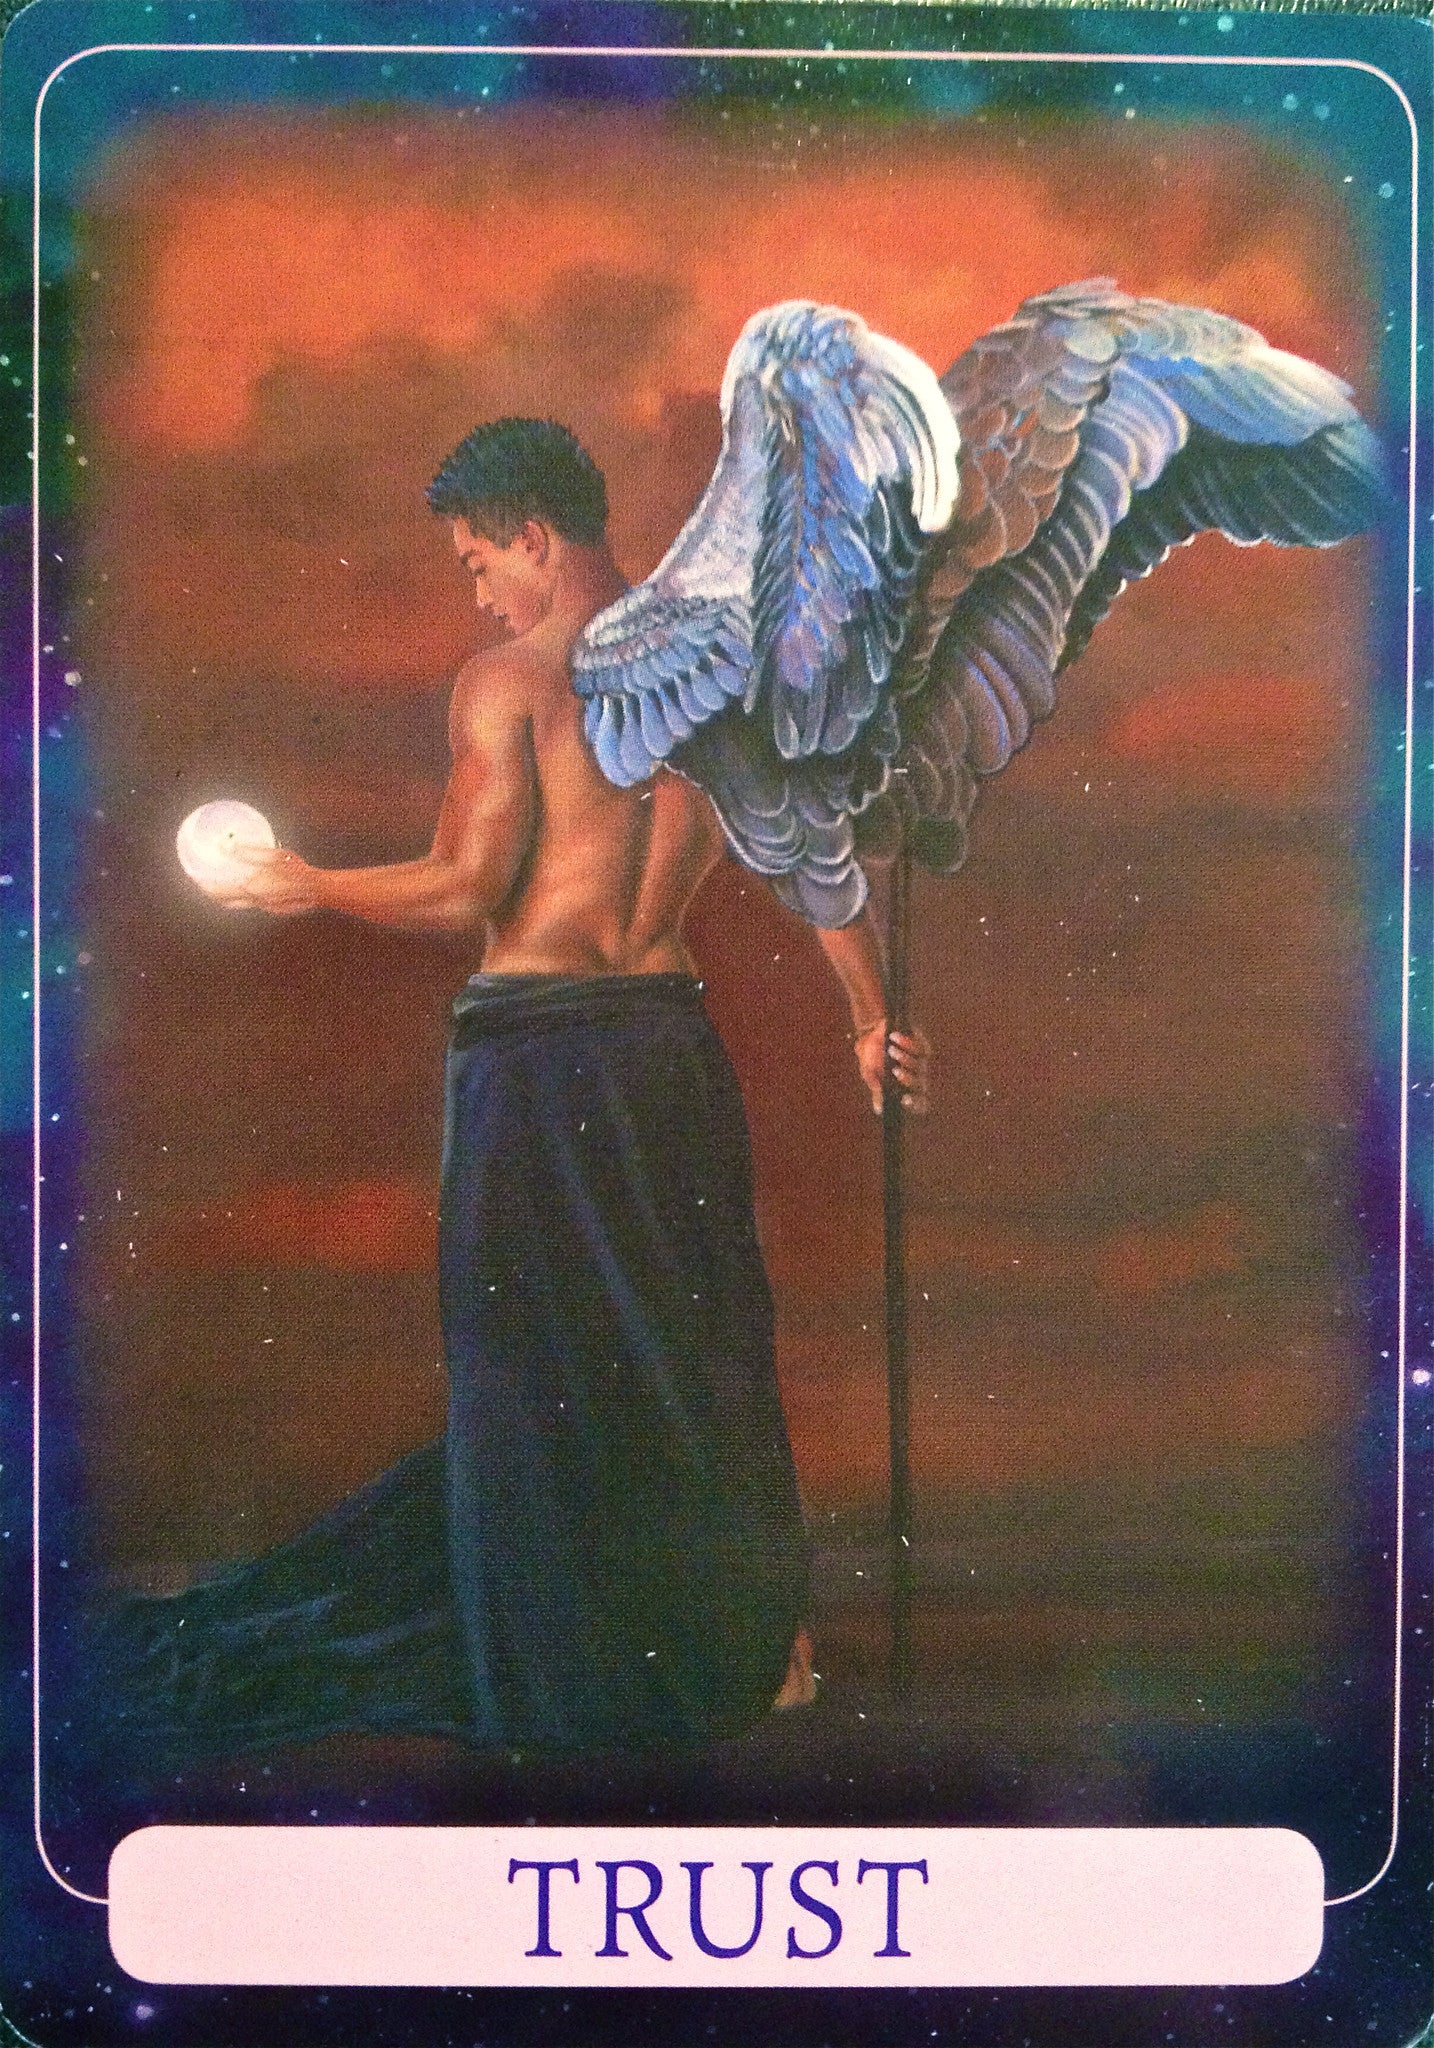 Trust: “This card asks you to trust that there is a purpose to life.